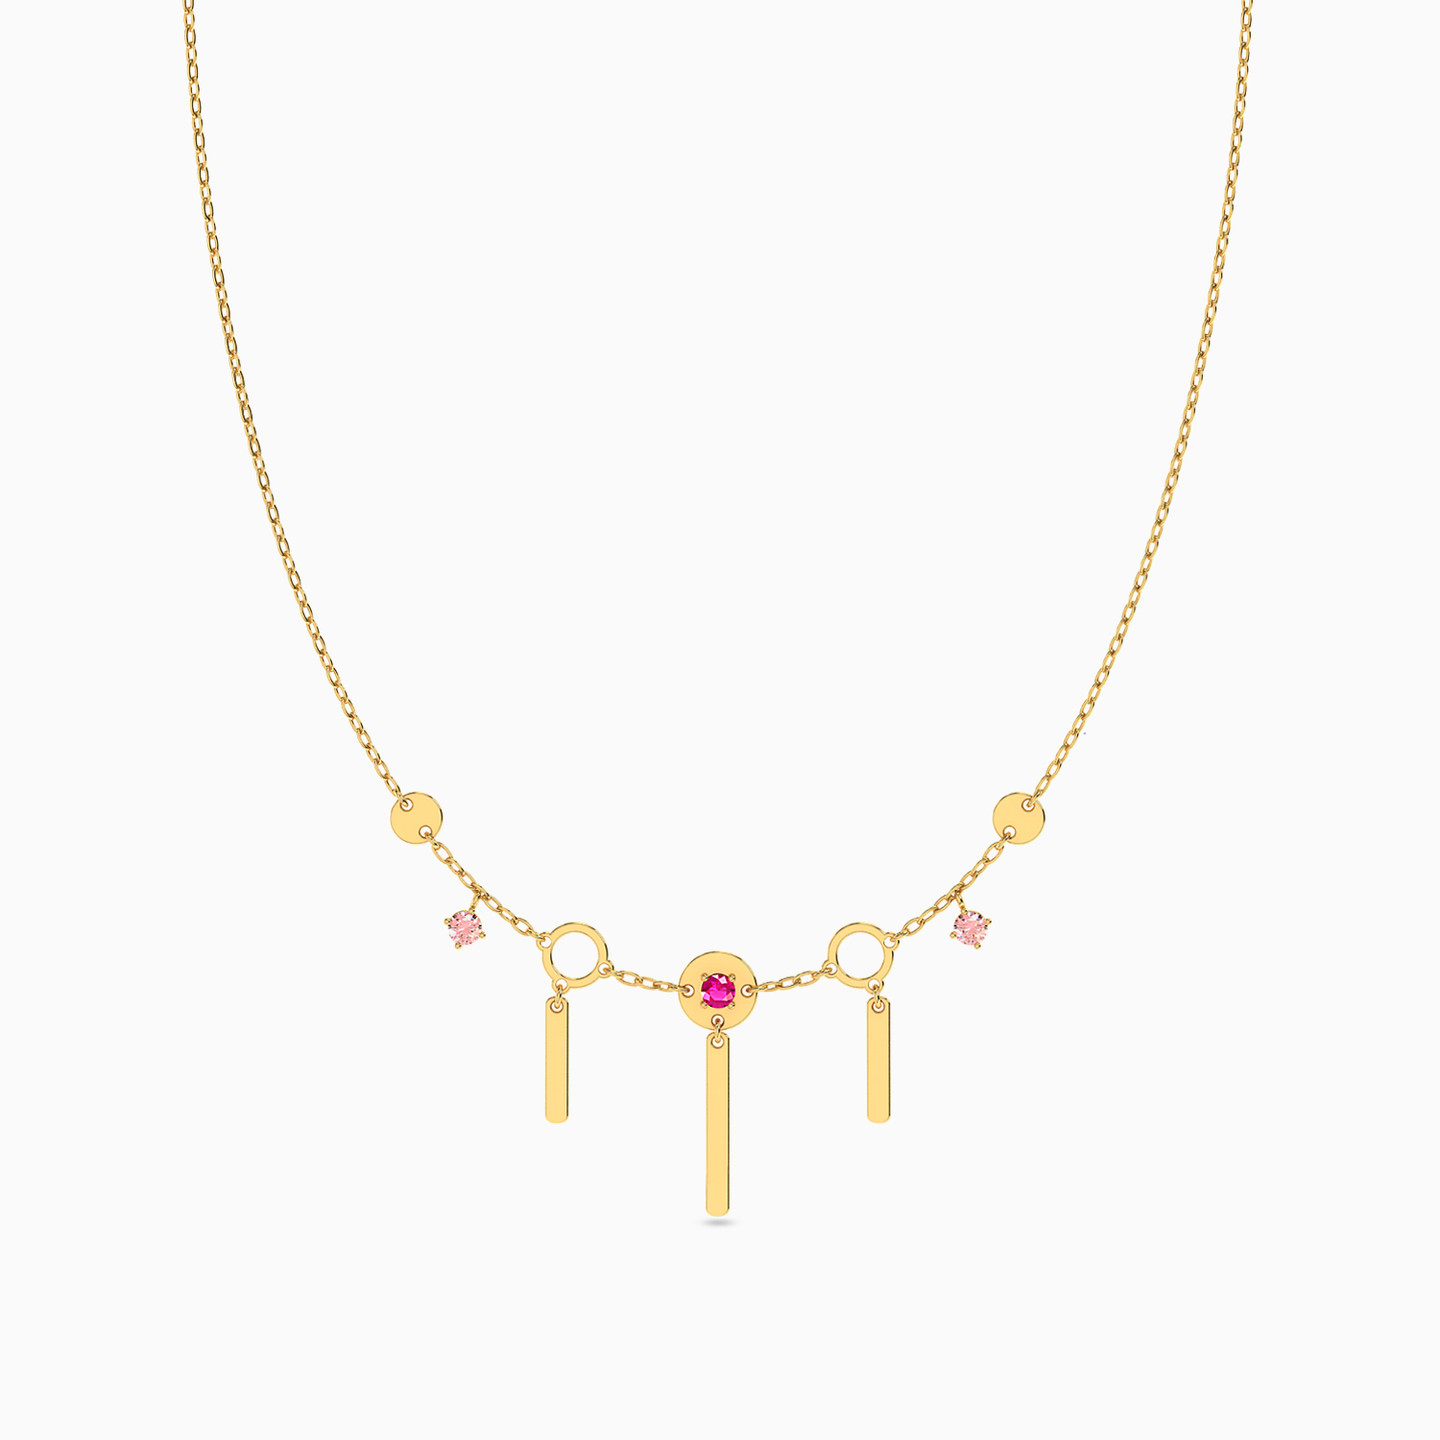 14K Gold Colored Stones Chain Necklace - 3